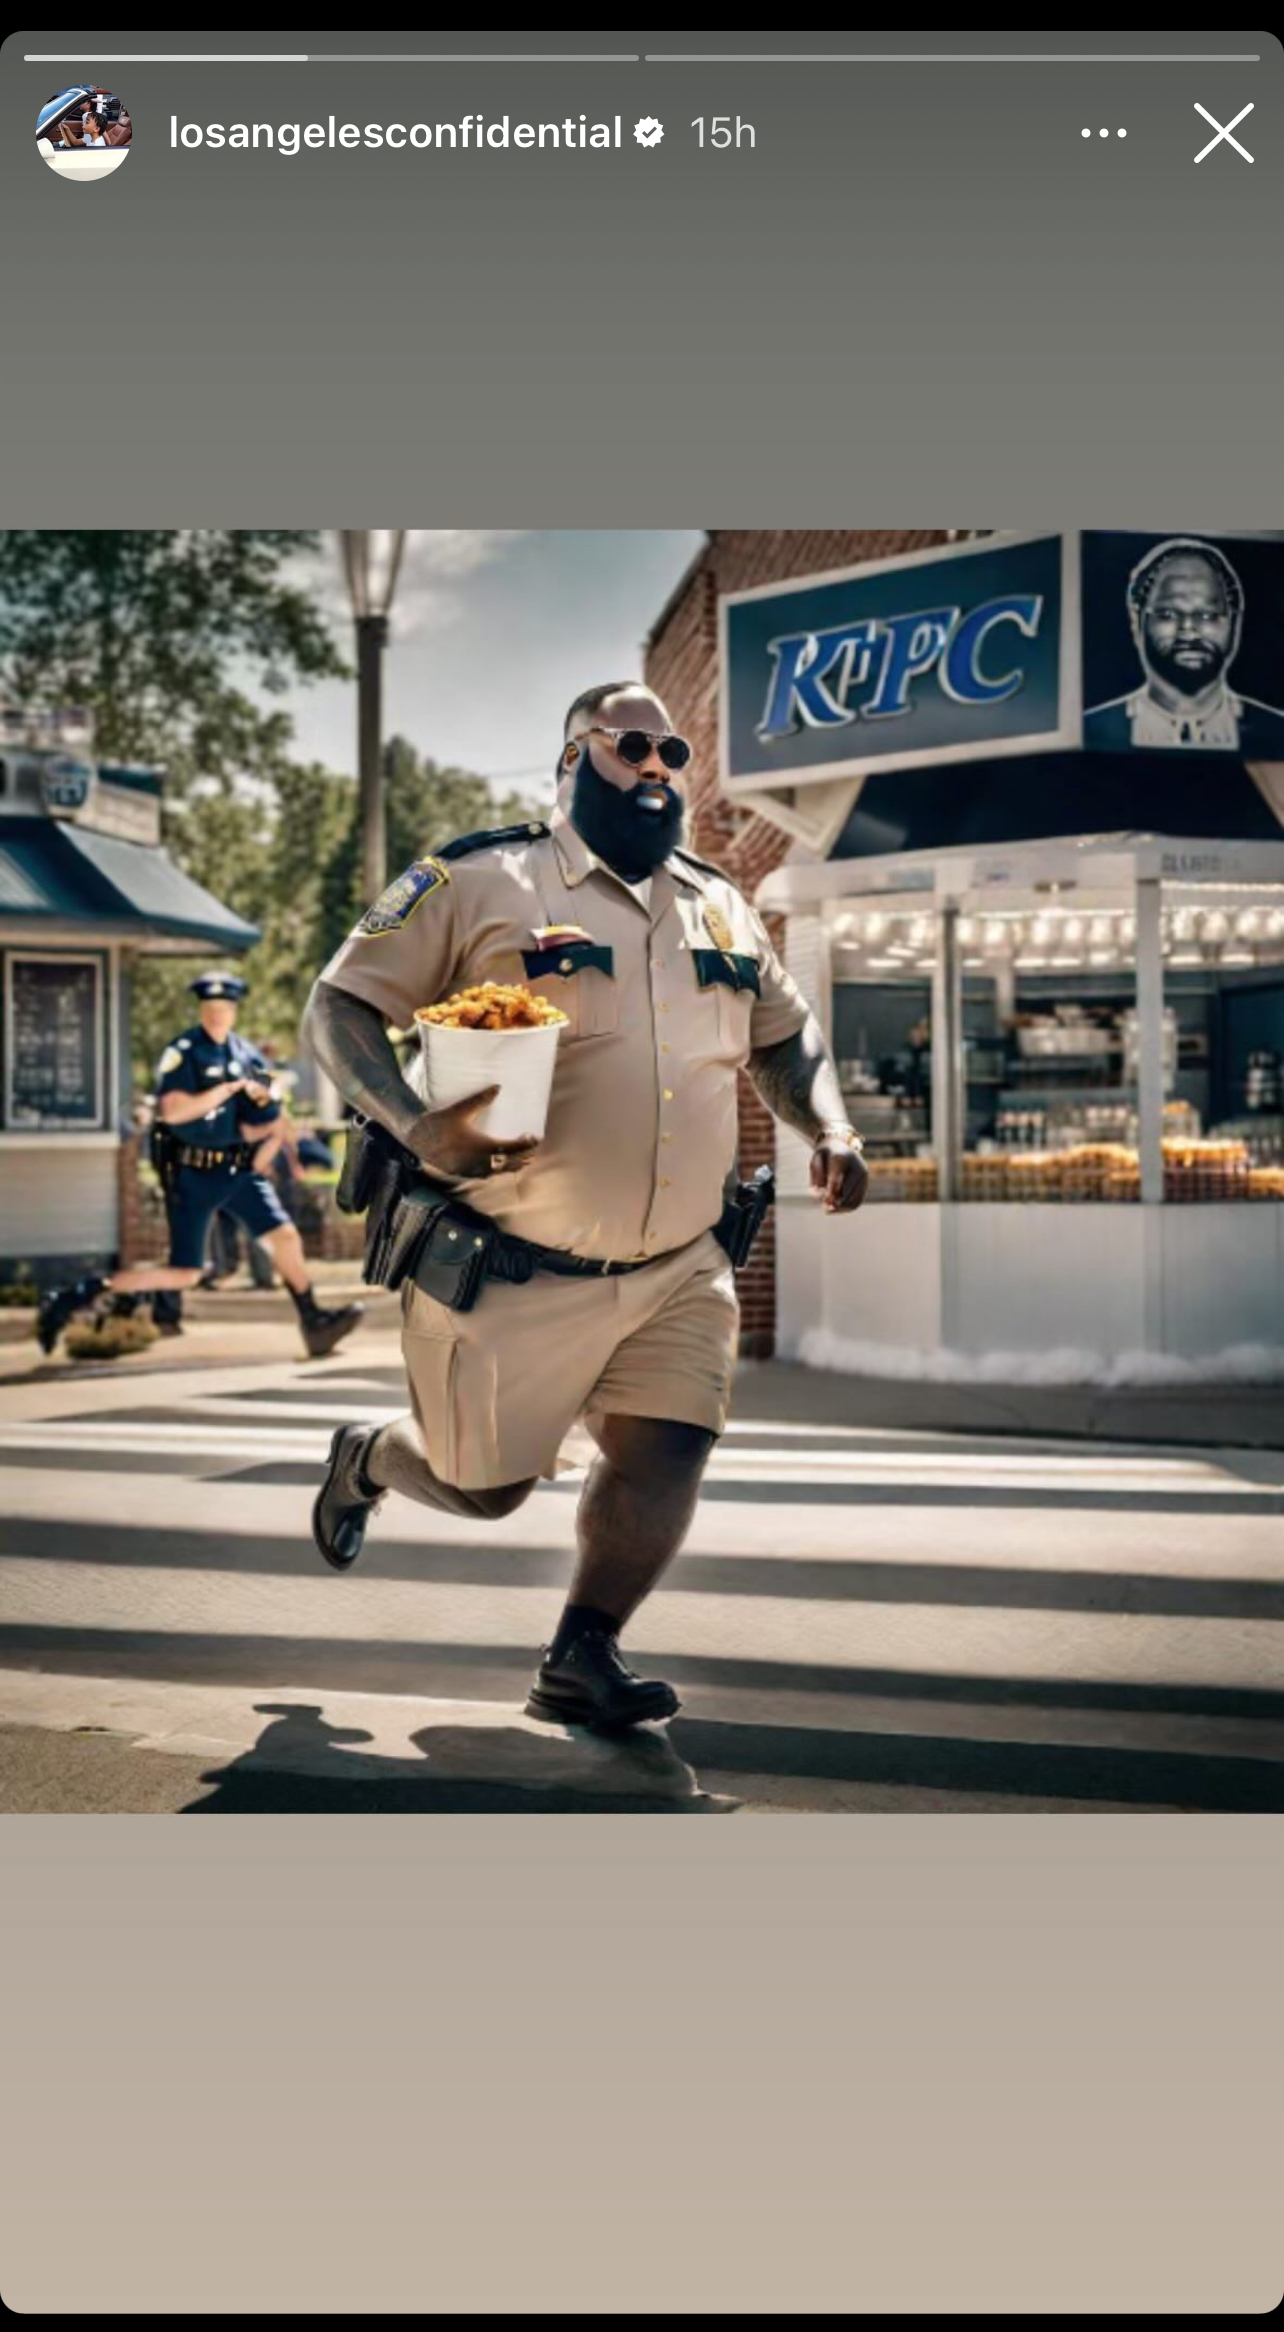 Person in police uniform running with a bucket of chicken, in what appears to be a humorous staged photo